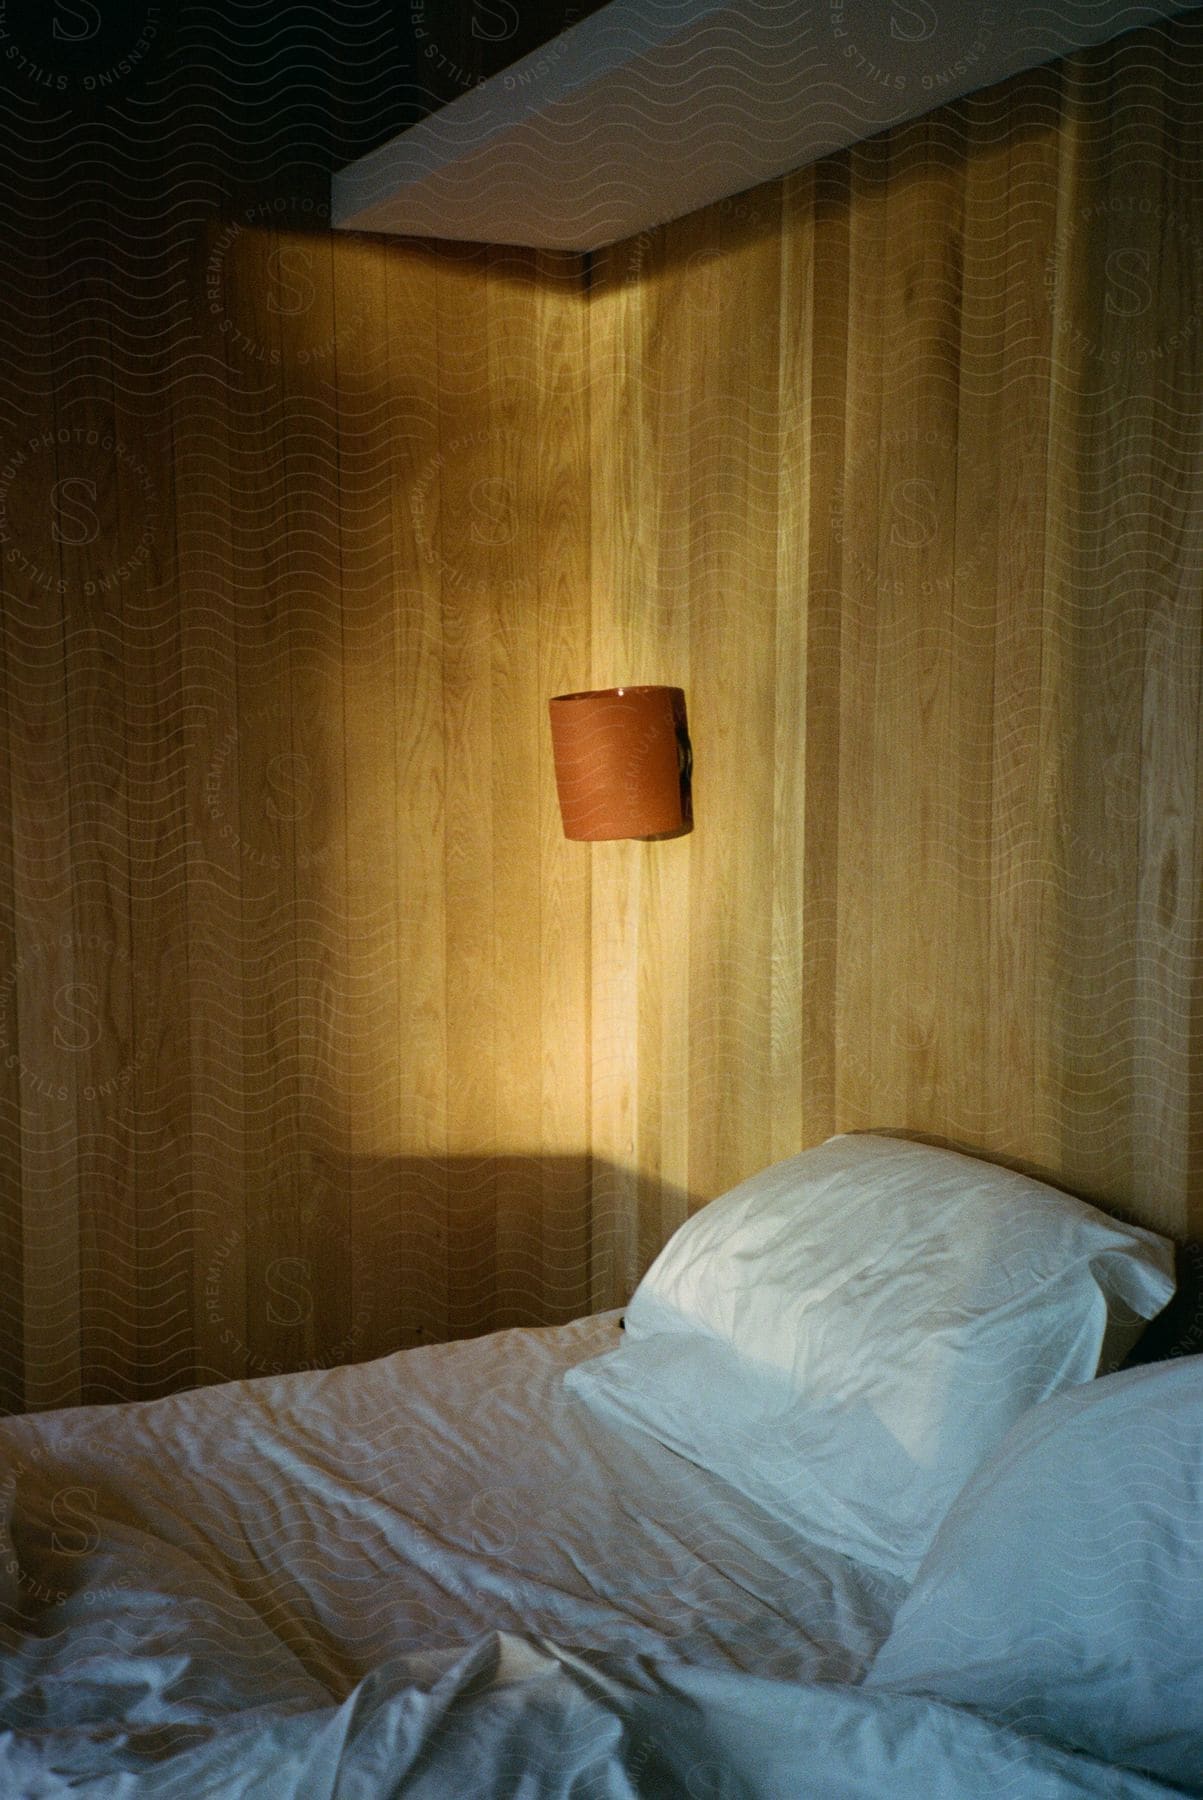 Orange lamp shade hanging from wooden wall in a bedroom